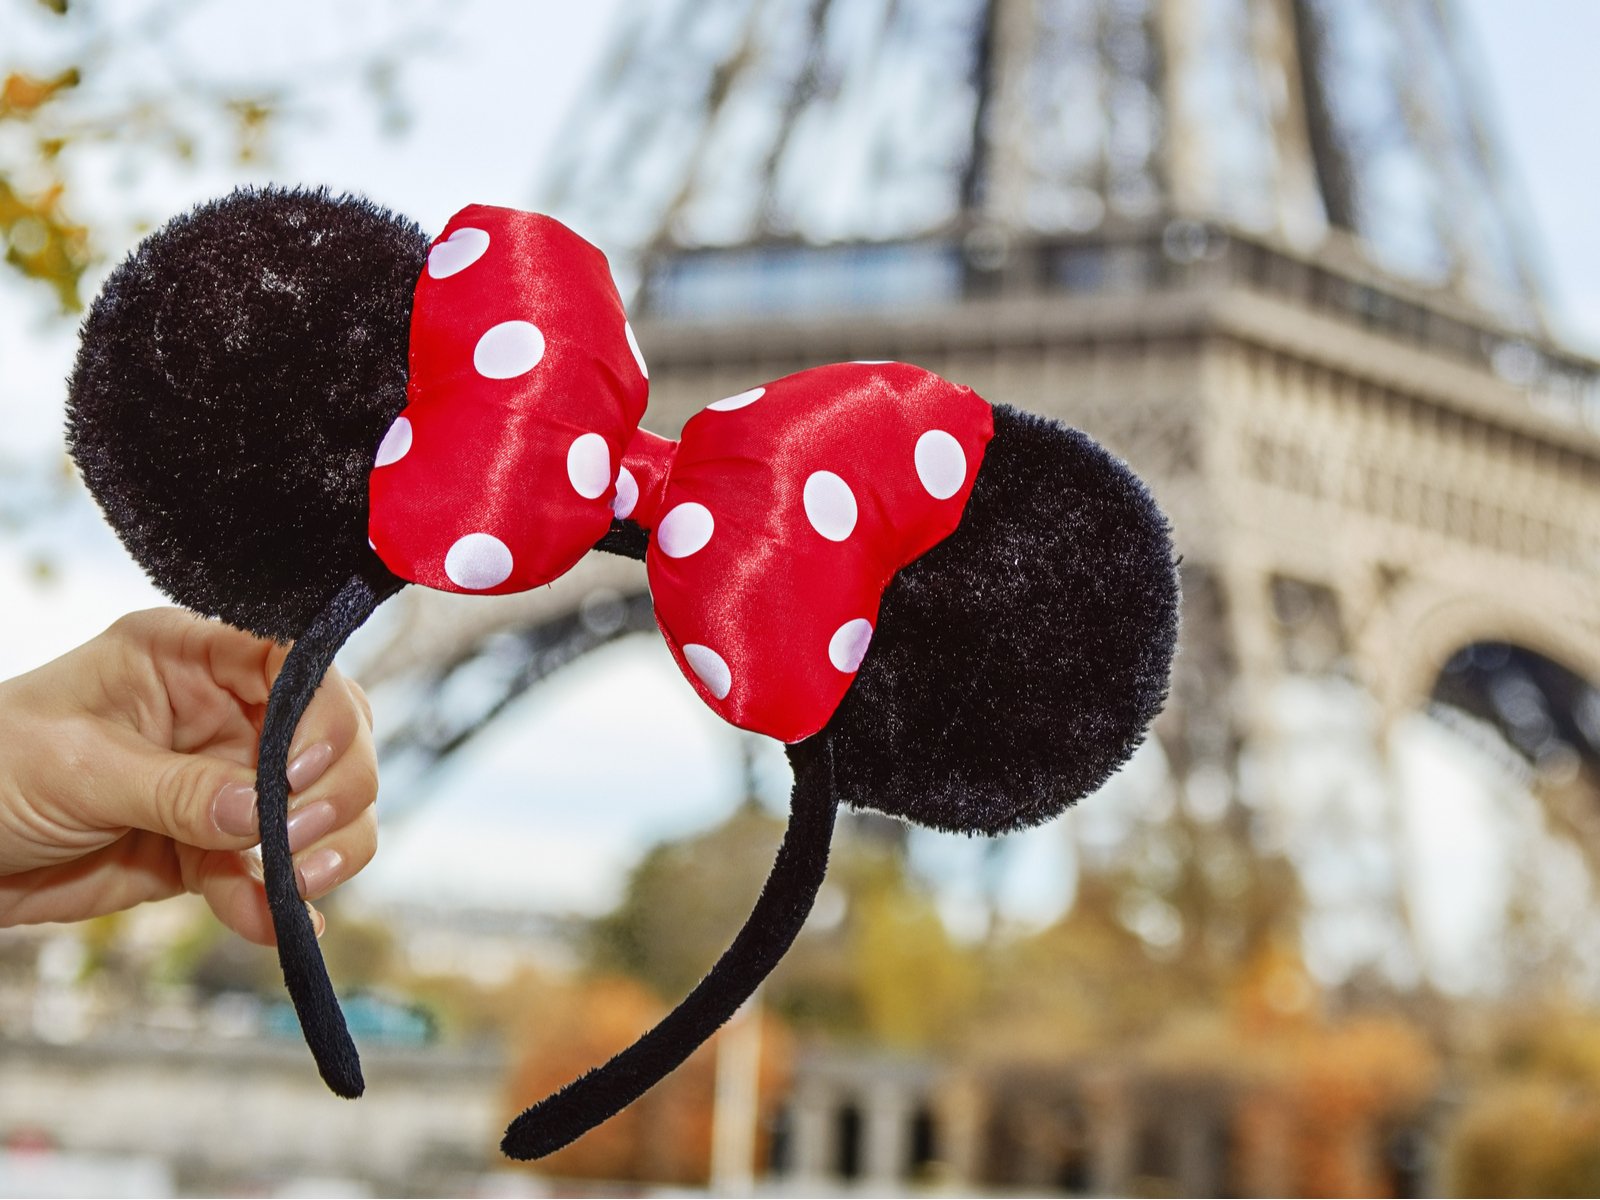 Disneyland fans from the UK will now have to change trains in Paris.